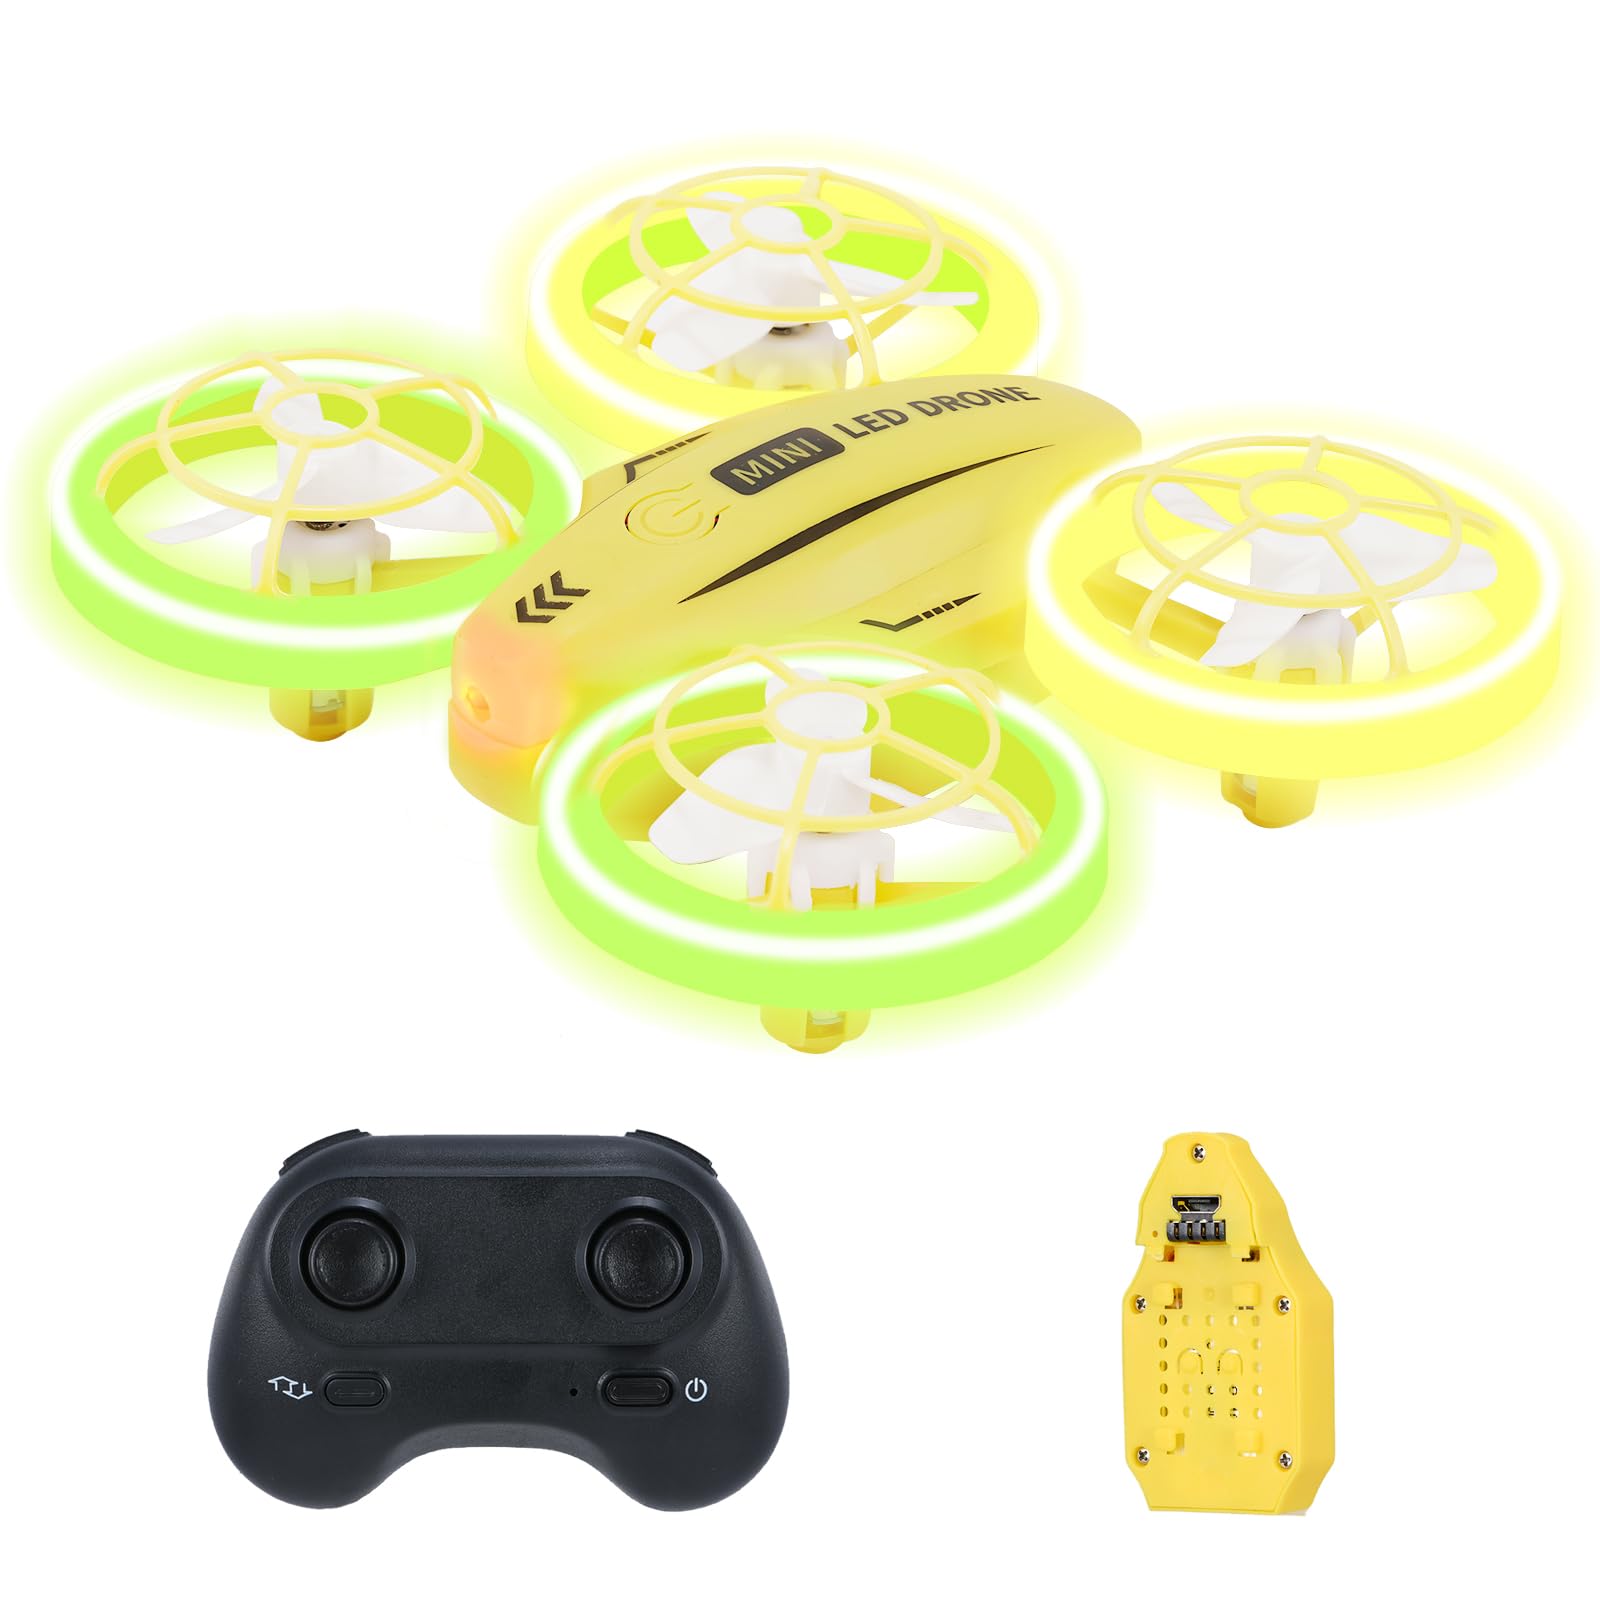 Mini Drone for Kids, Colorful LED RC Drone Quadcopter for Beginners with Headless Mode, 360 Flips, Altitude Hold, 3 Speeds Mode,Full Propeller Protect,Toys Gifts for Boys Girls,Yellow